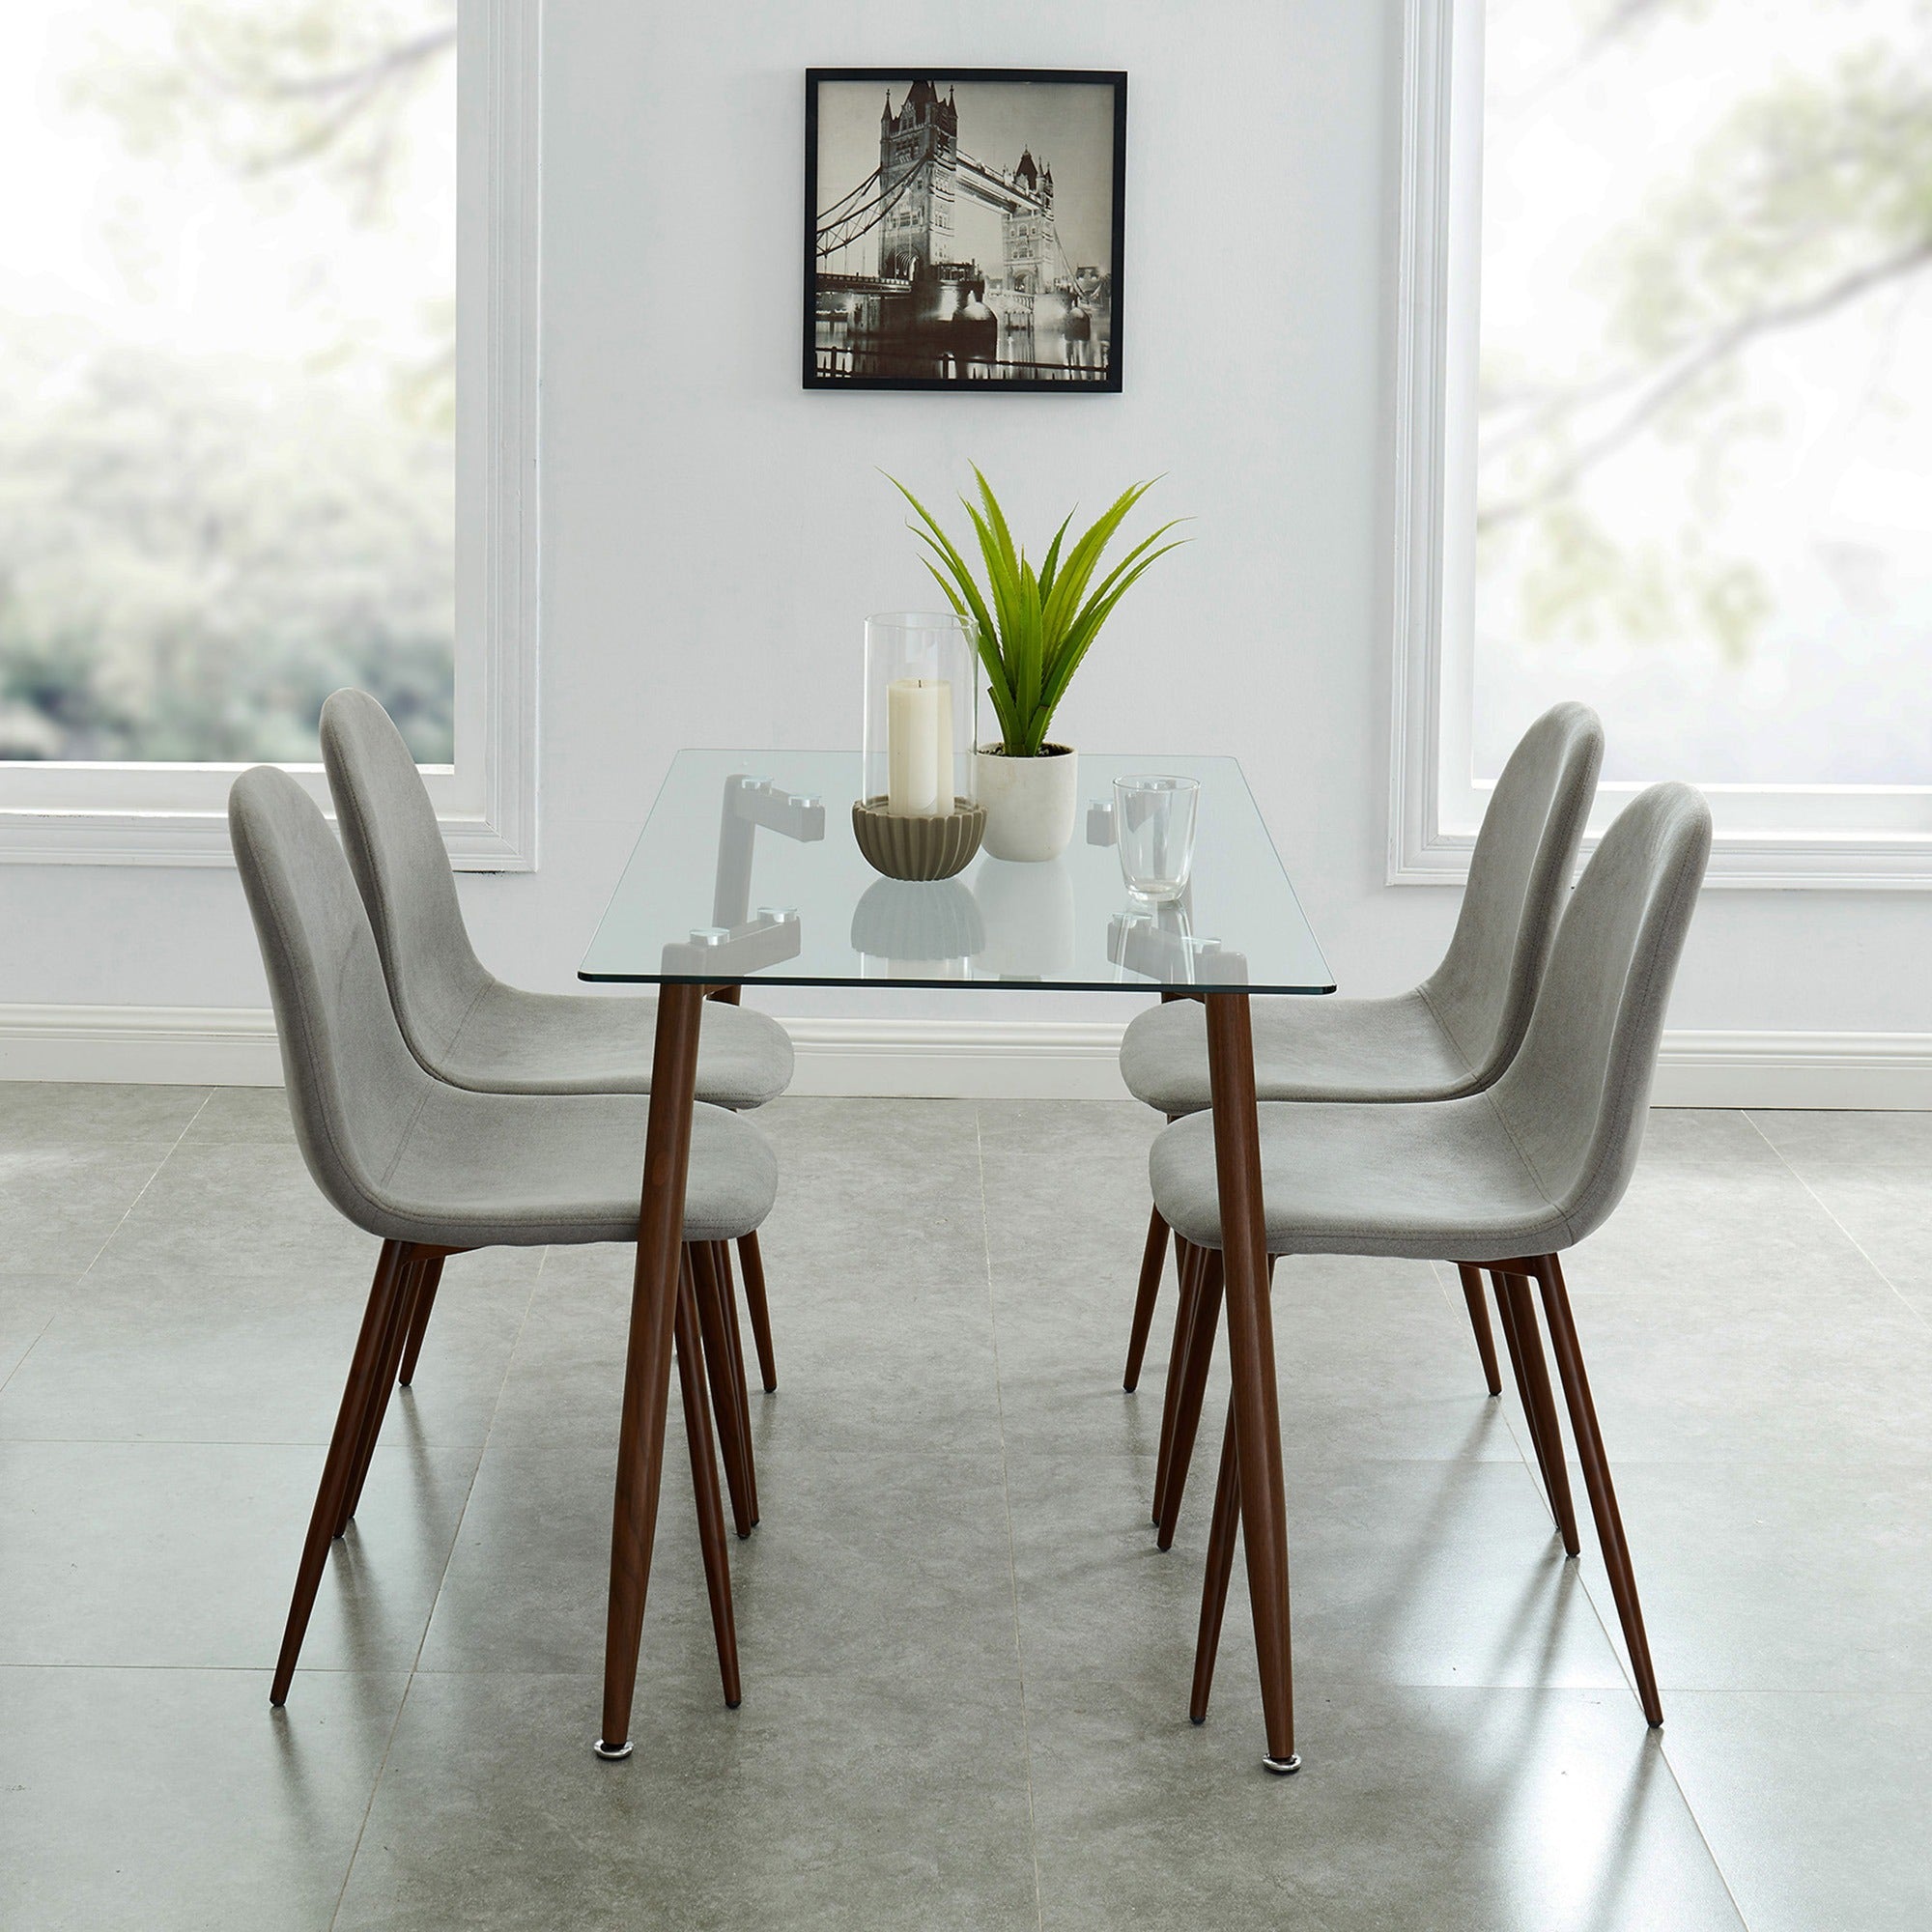 Abbot/Lyna 5pc Dining Set in Walnut with Beige Chair